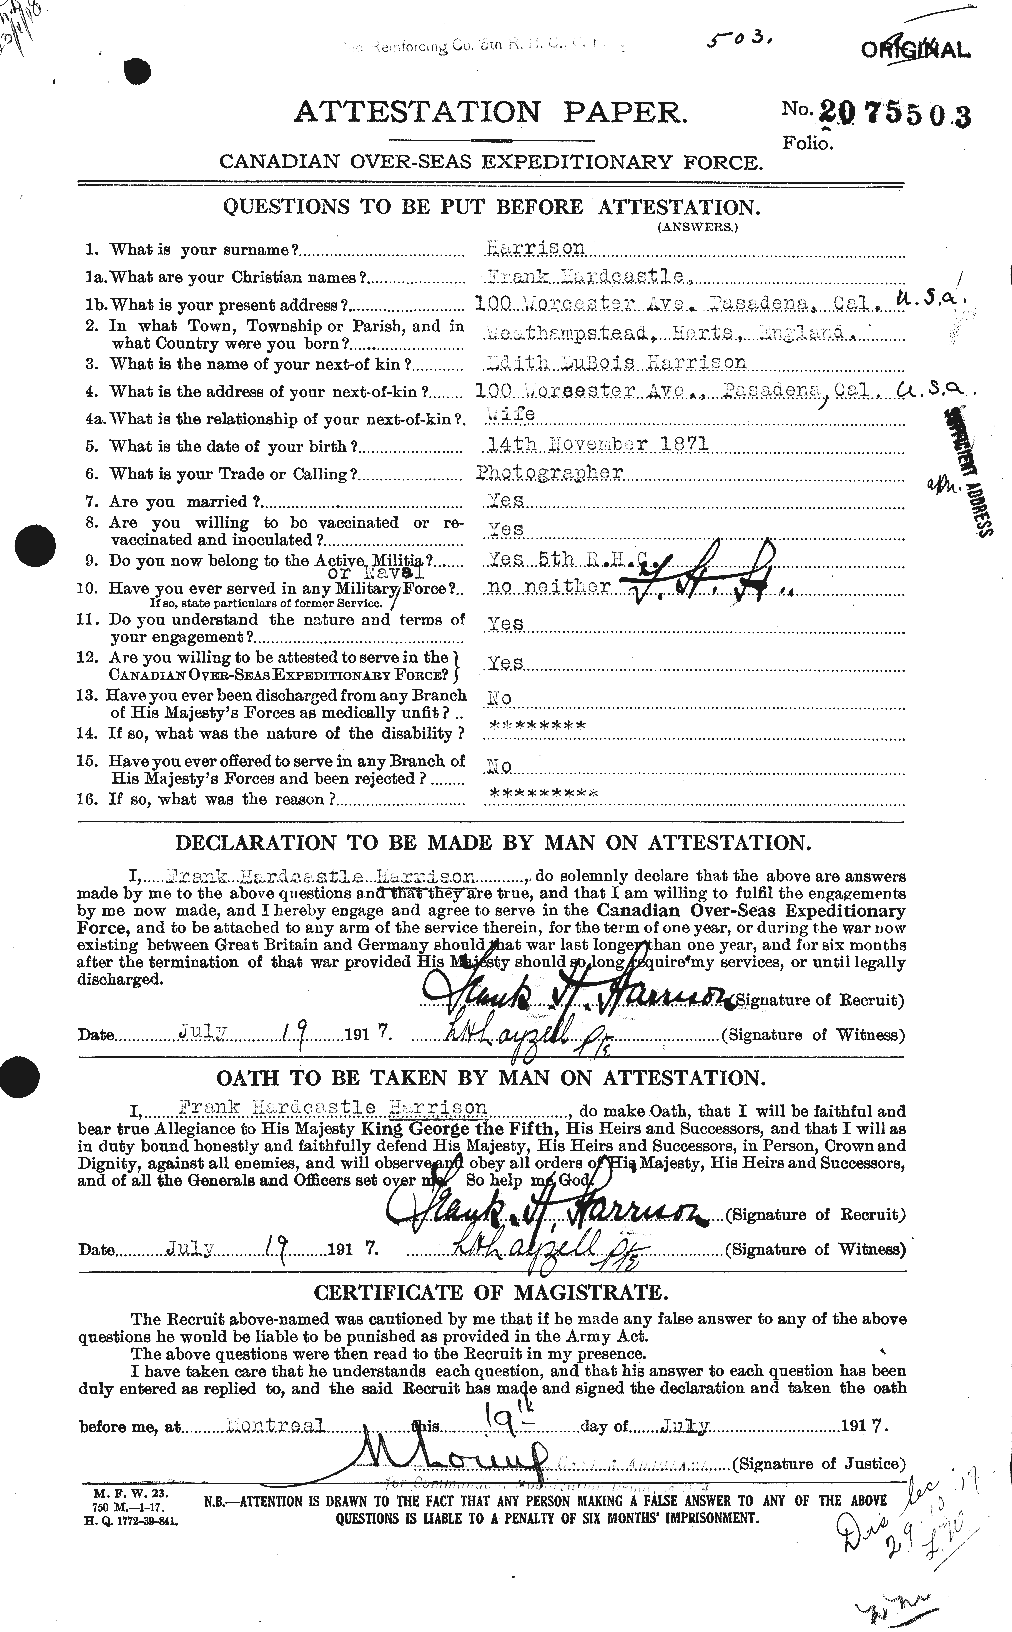 Personnel Records of the First World War - CEF 380387a